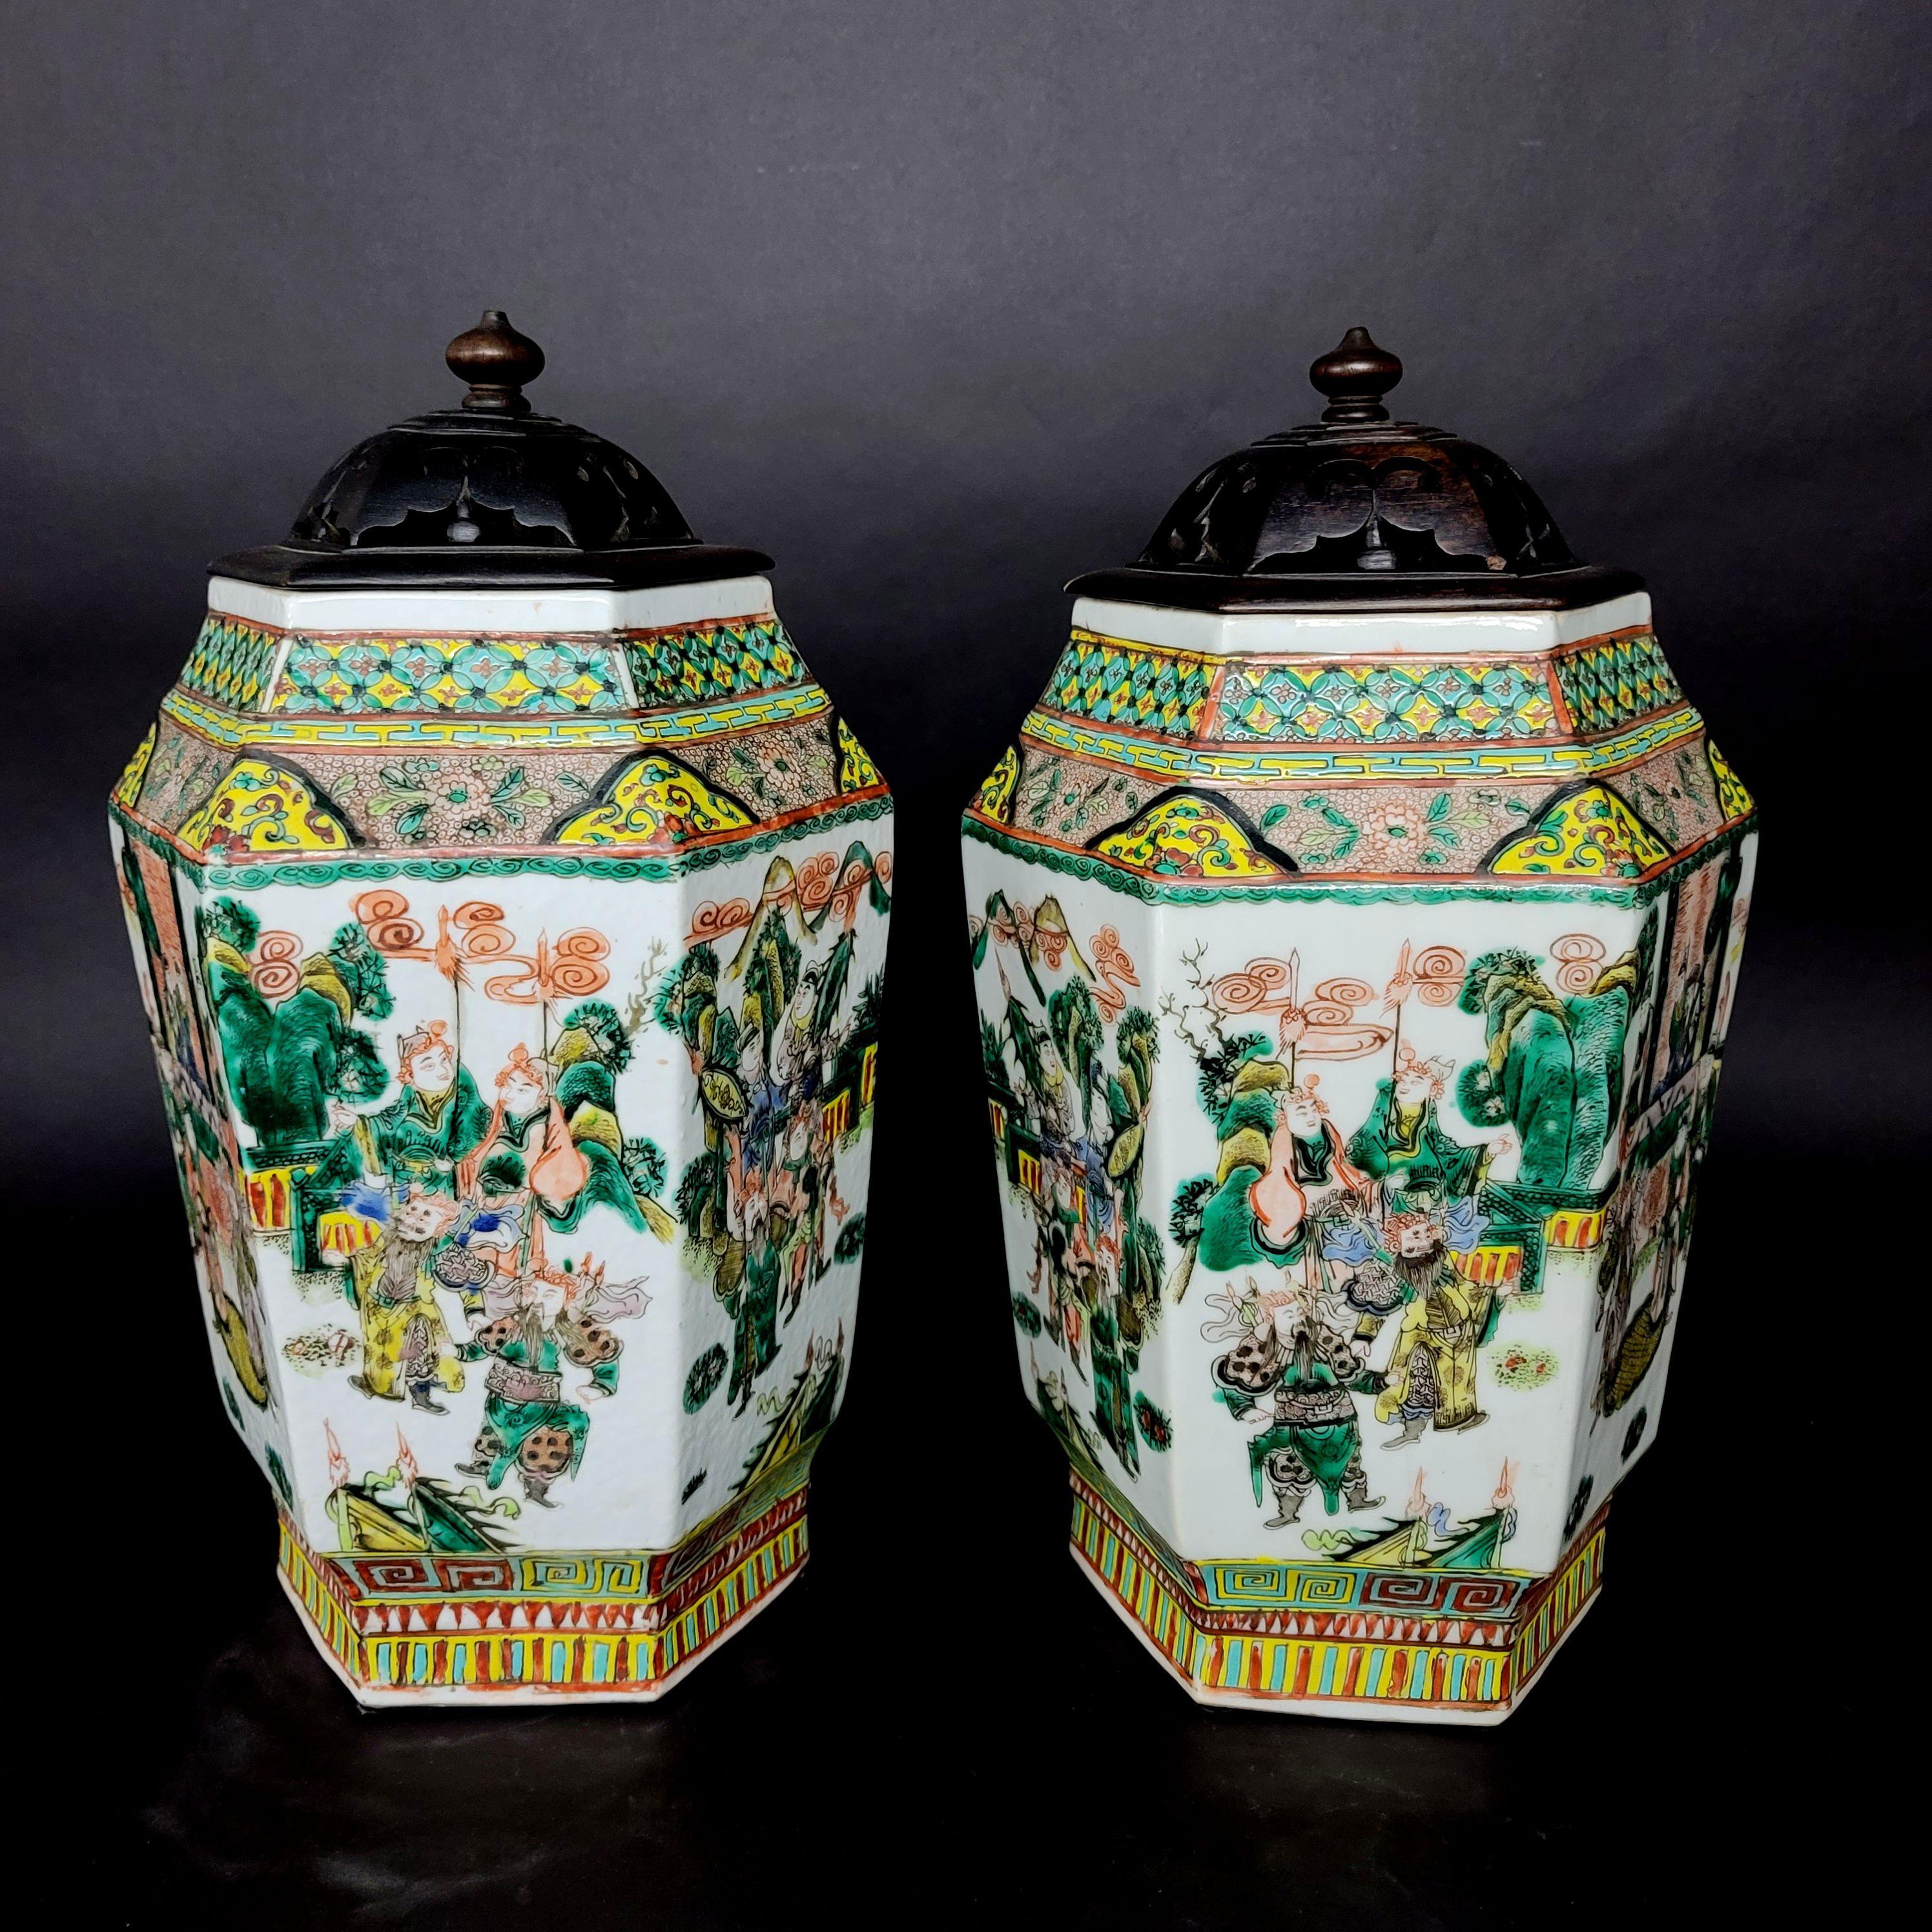 Matching Pair of Chinese Hexagonal Porcelain Vases, 19th Century For Sale 2